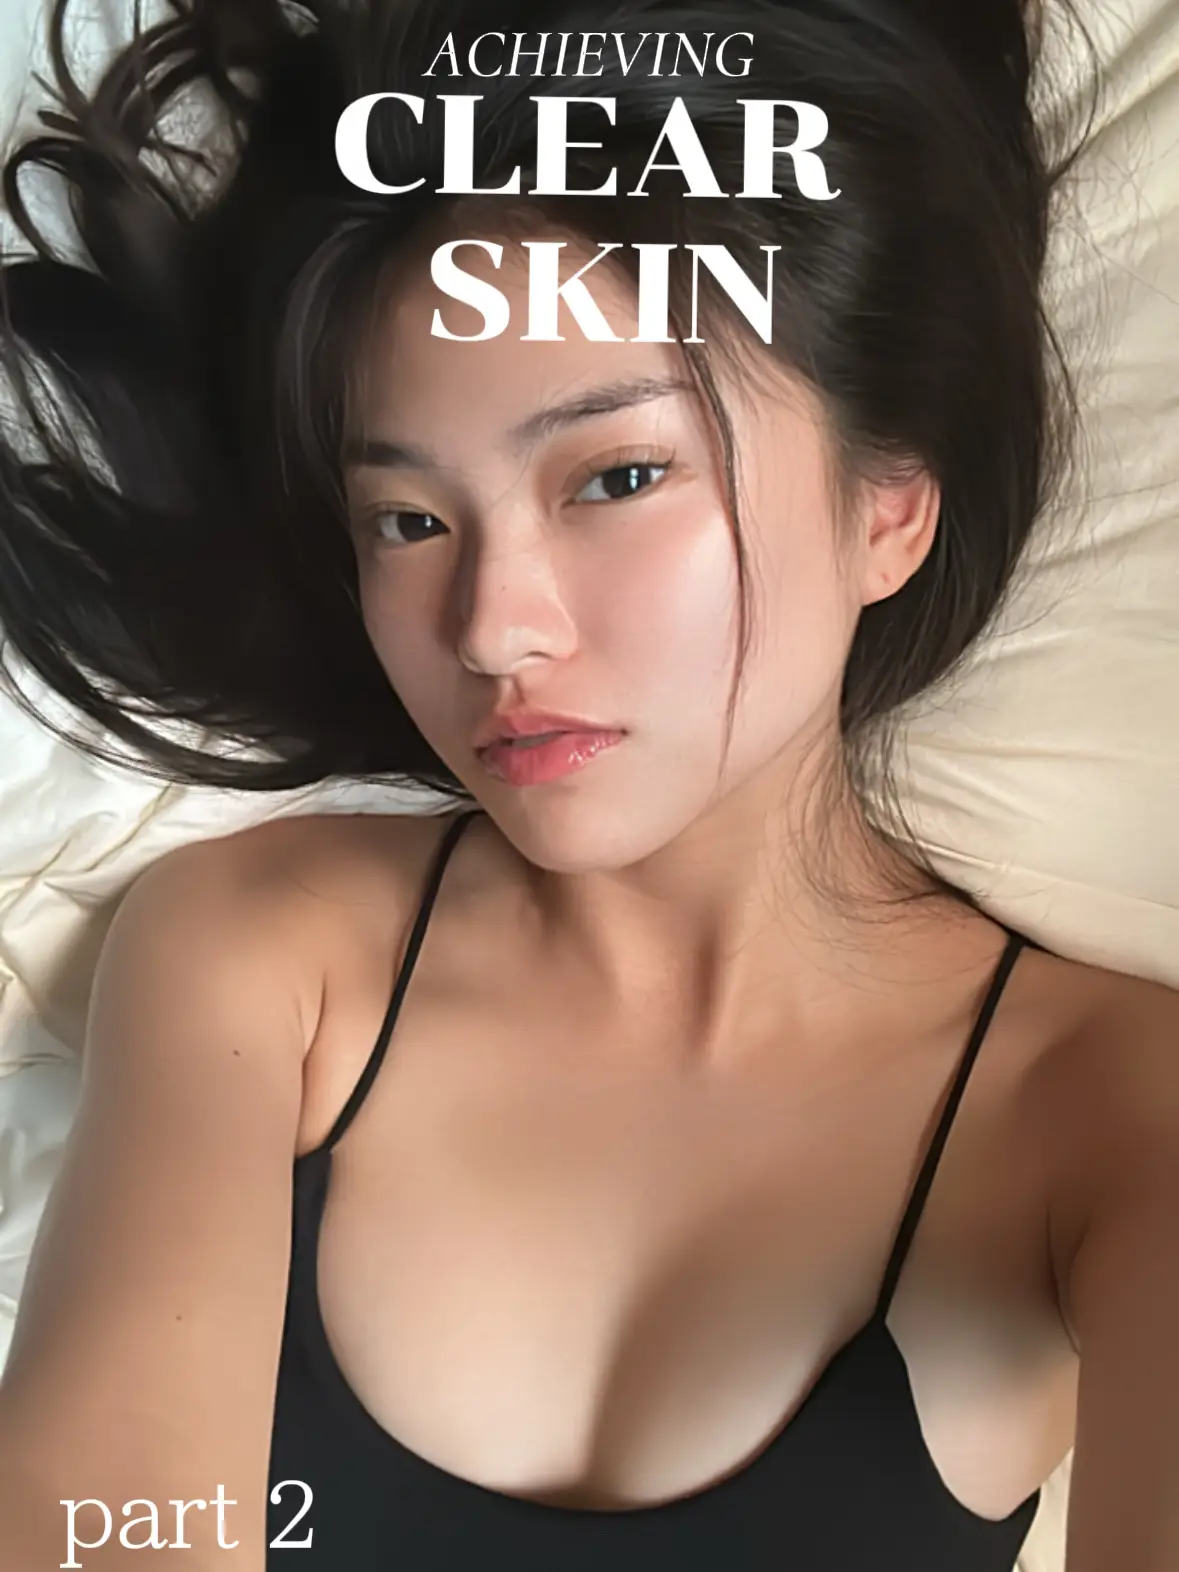 your skin needs to breathe ~ ༊*·˚'s images(0)